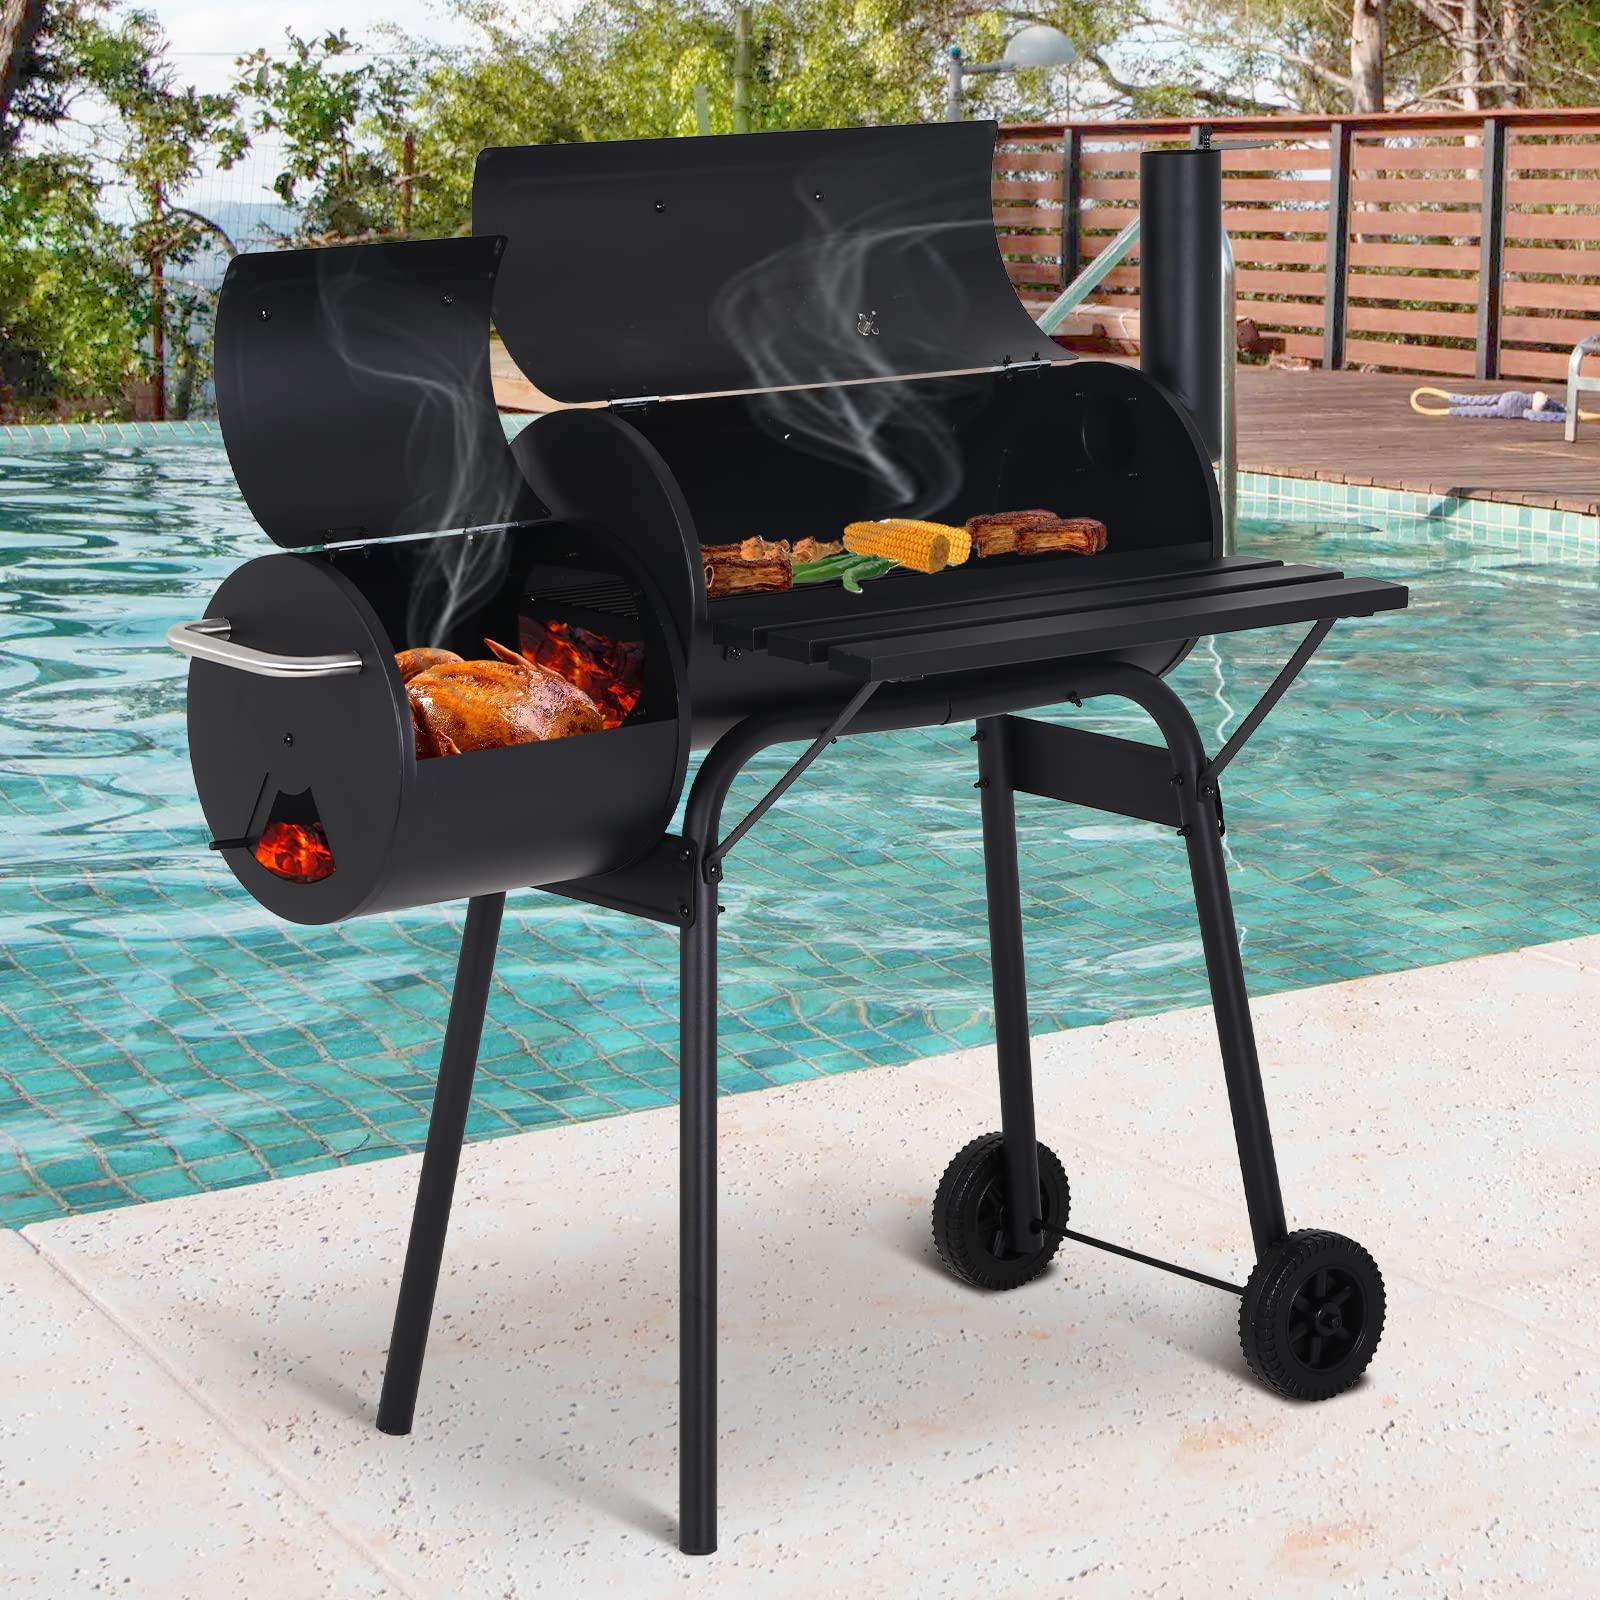 Charcoal Grills 43’’ Outdoor BBQ Grill Camping Grill, Stainless Steel Grill Offset Smoker with Cover, Portable Grill Patio Backyard Camping BBQ Barbecue Grill for Picnic Camping Party, Black - CookCave